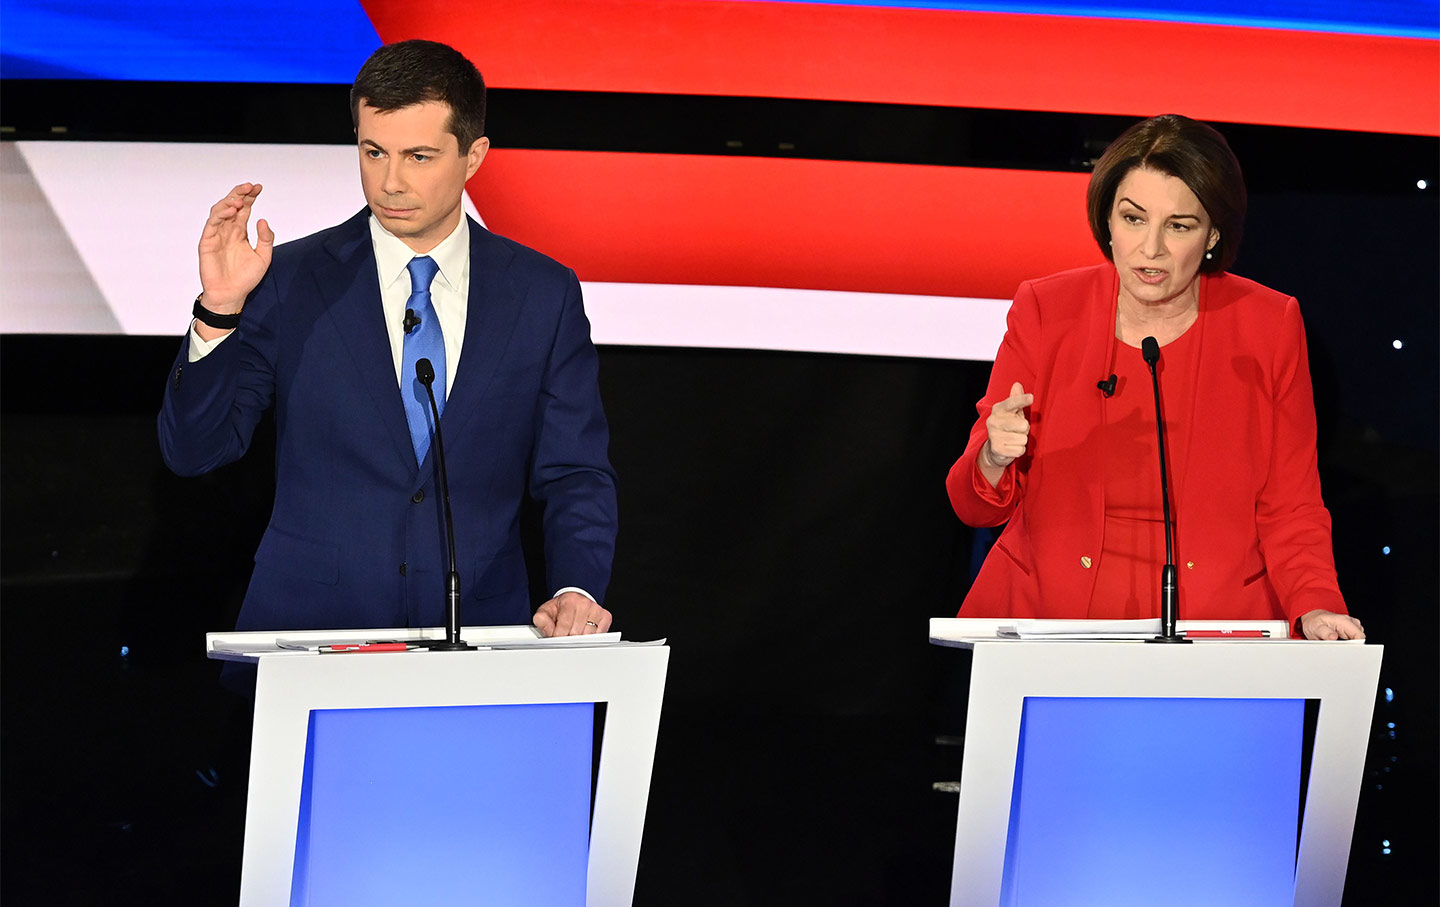 Pete and Amy Needed to Crush the Iowa Debate. They Did Not.